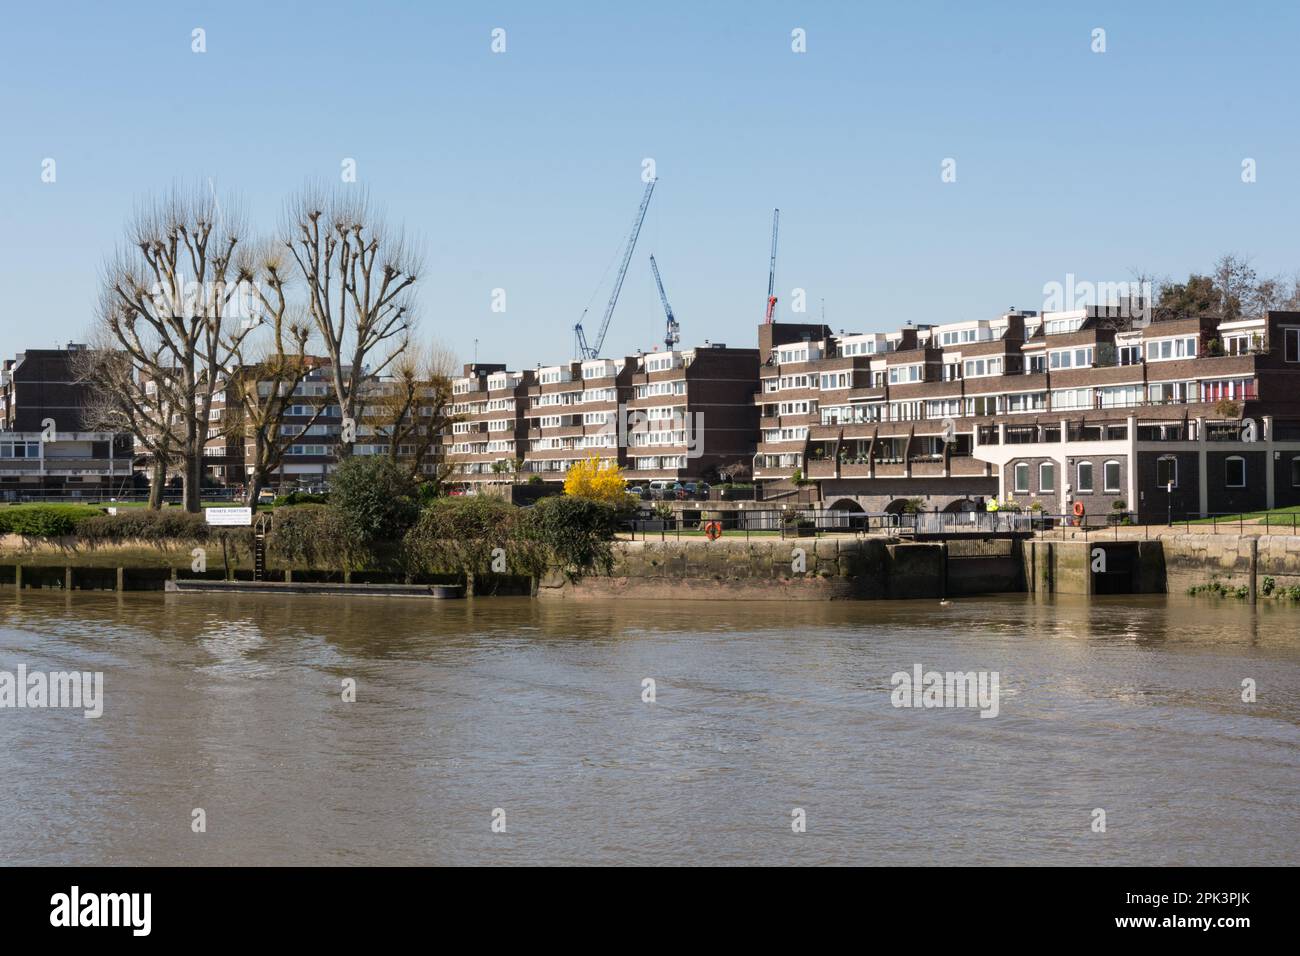 The entrance to the Brentford Dock housing development from the River Thames, Brentford, Middlesex, London, TW8, UK Stock Photo